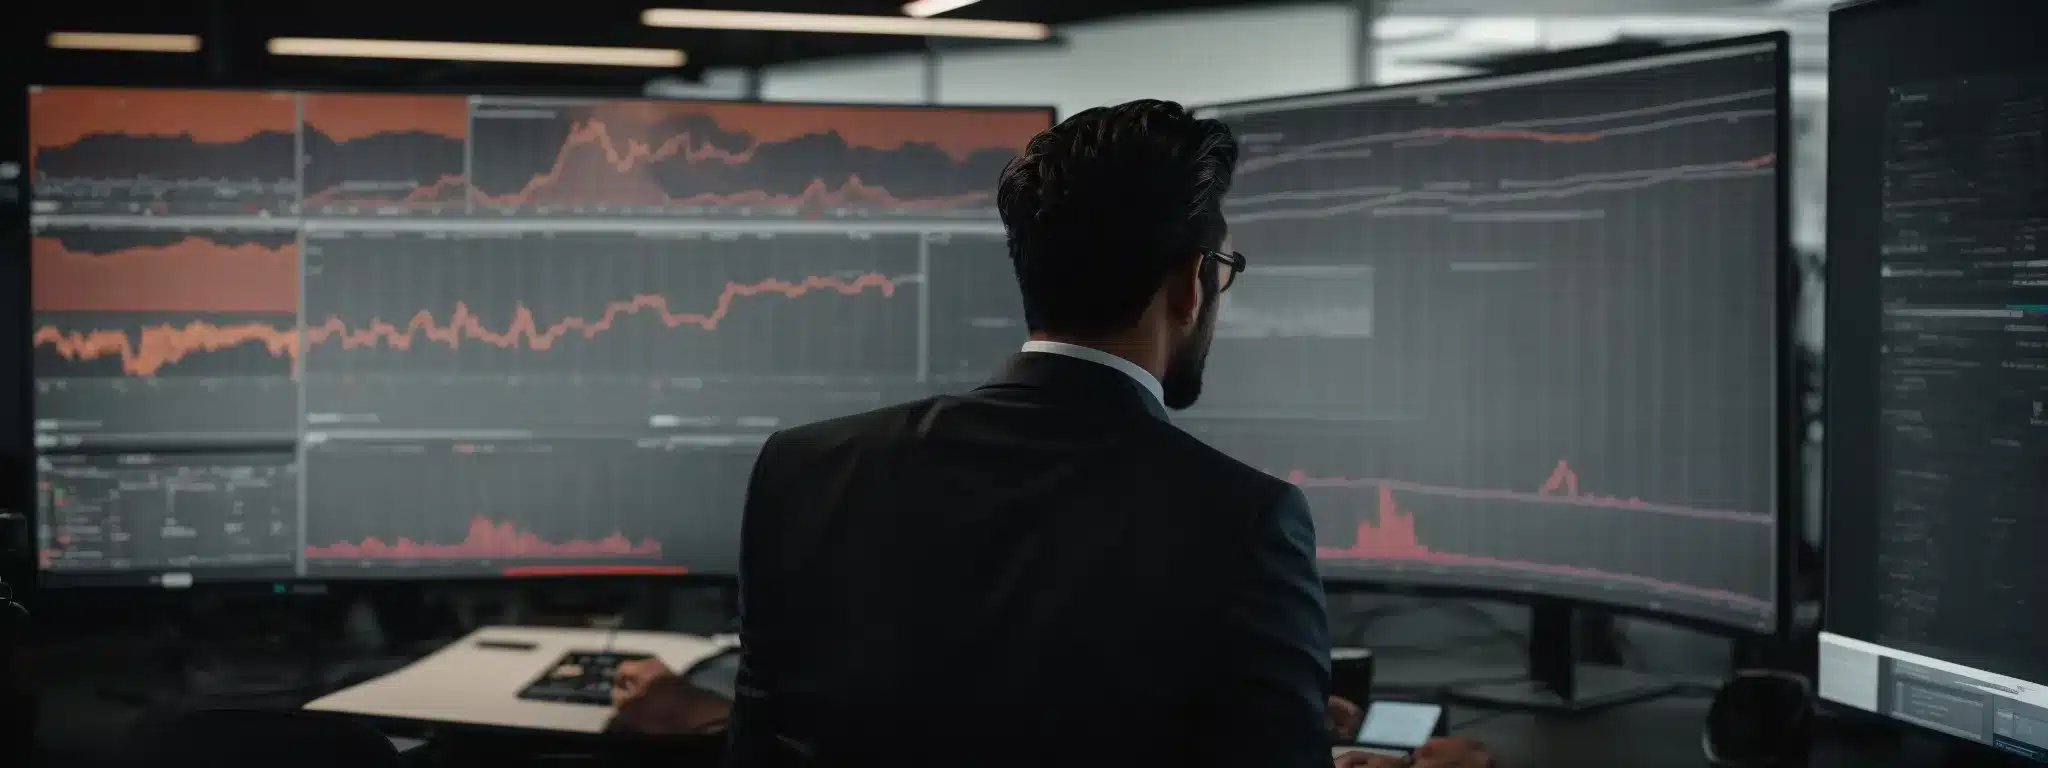 A Digital Strategist Is Intently Studying Graphs On A Large Monitor, Outlining A Social Media Campaign Plan.